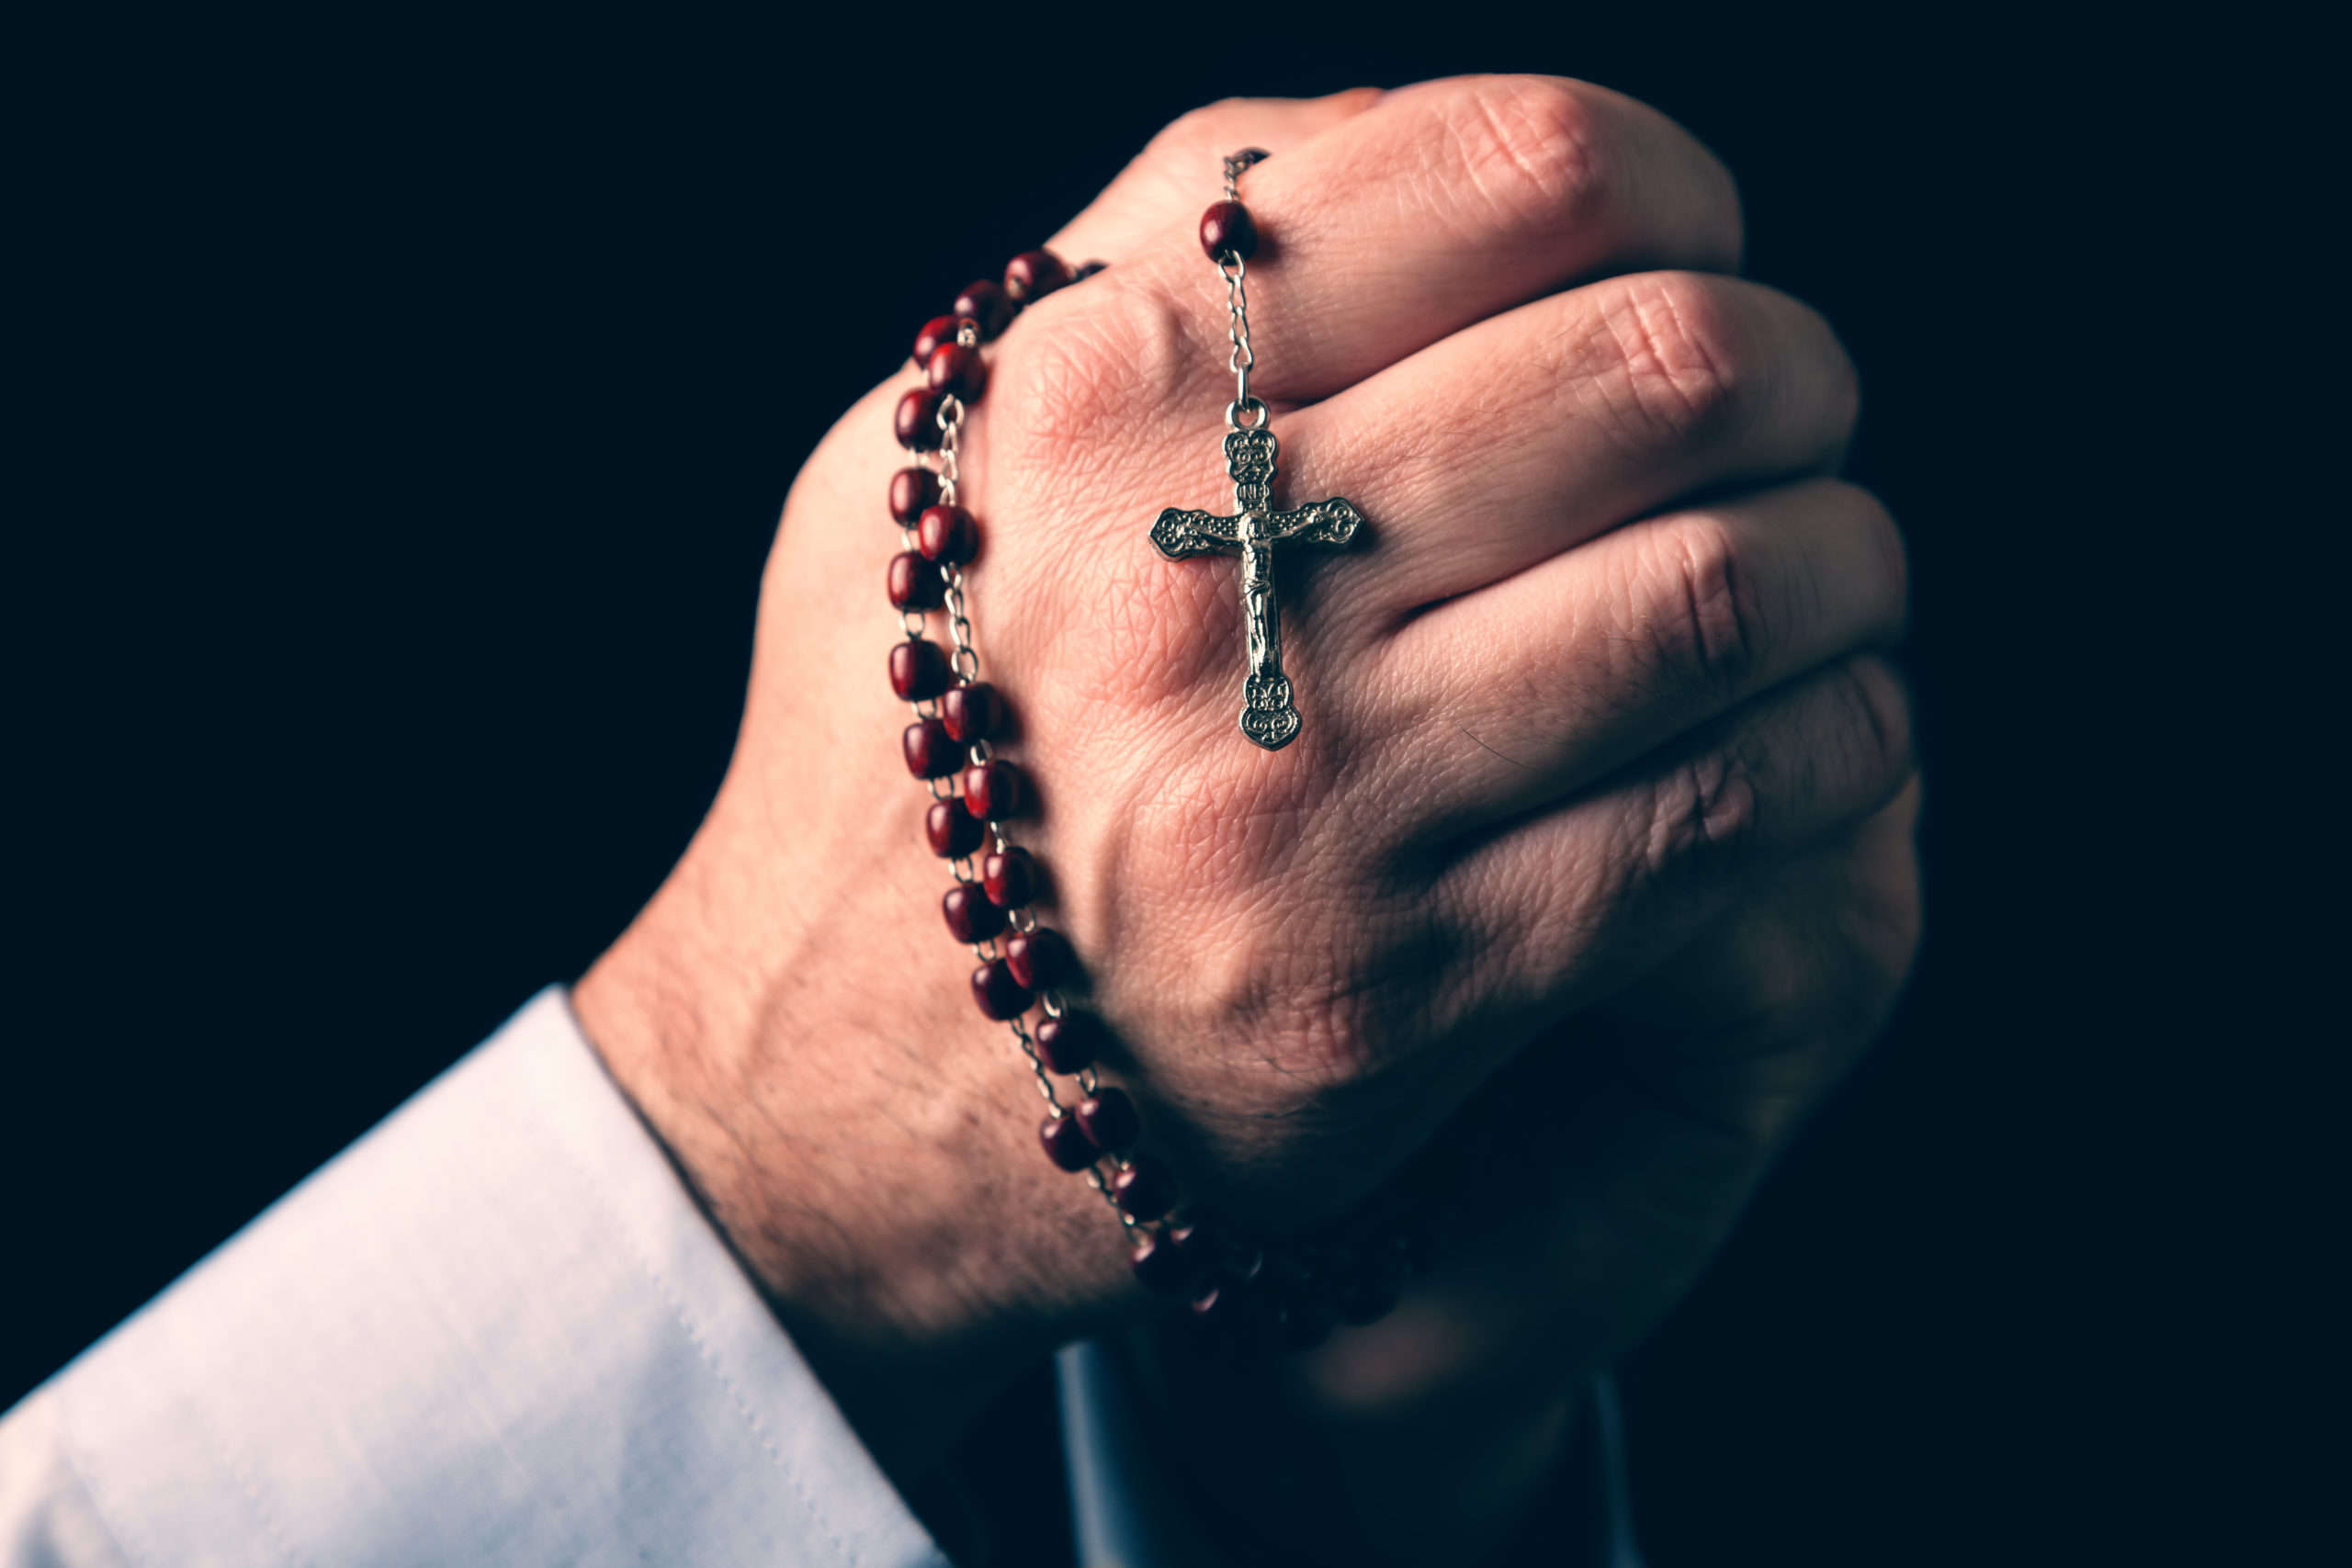 How to pray the Rosary – Video